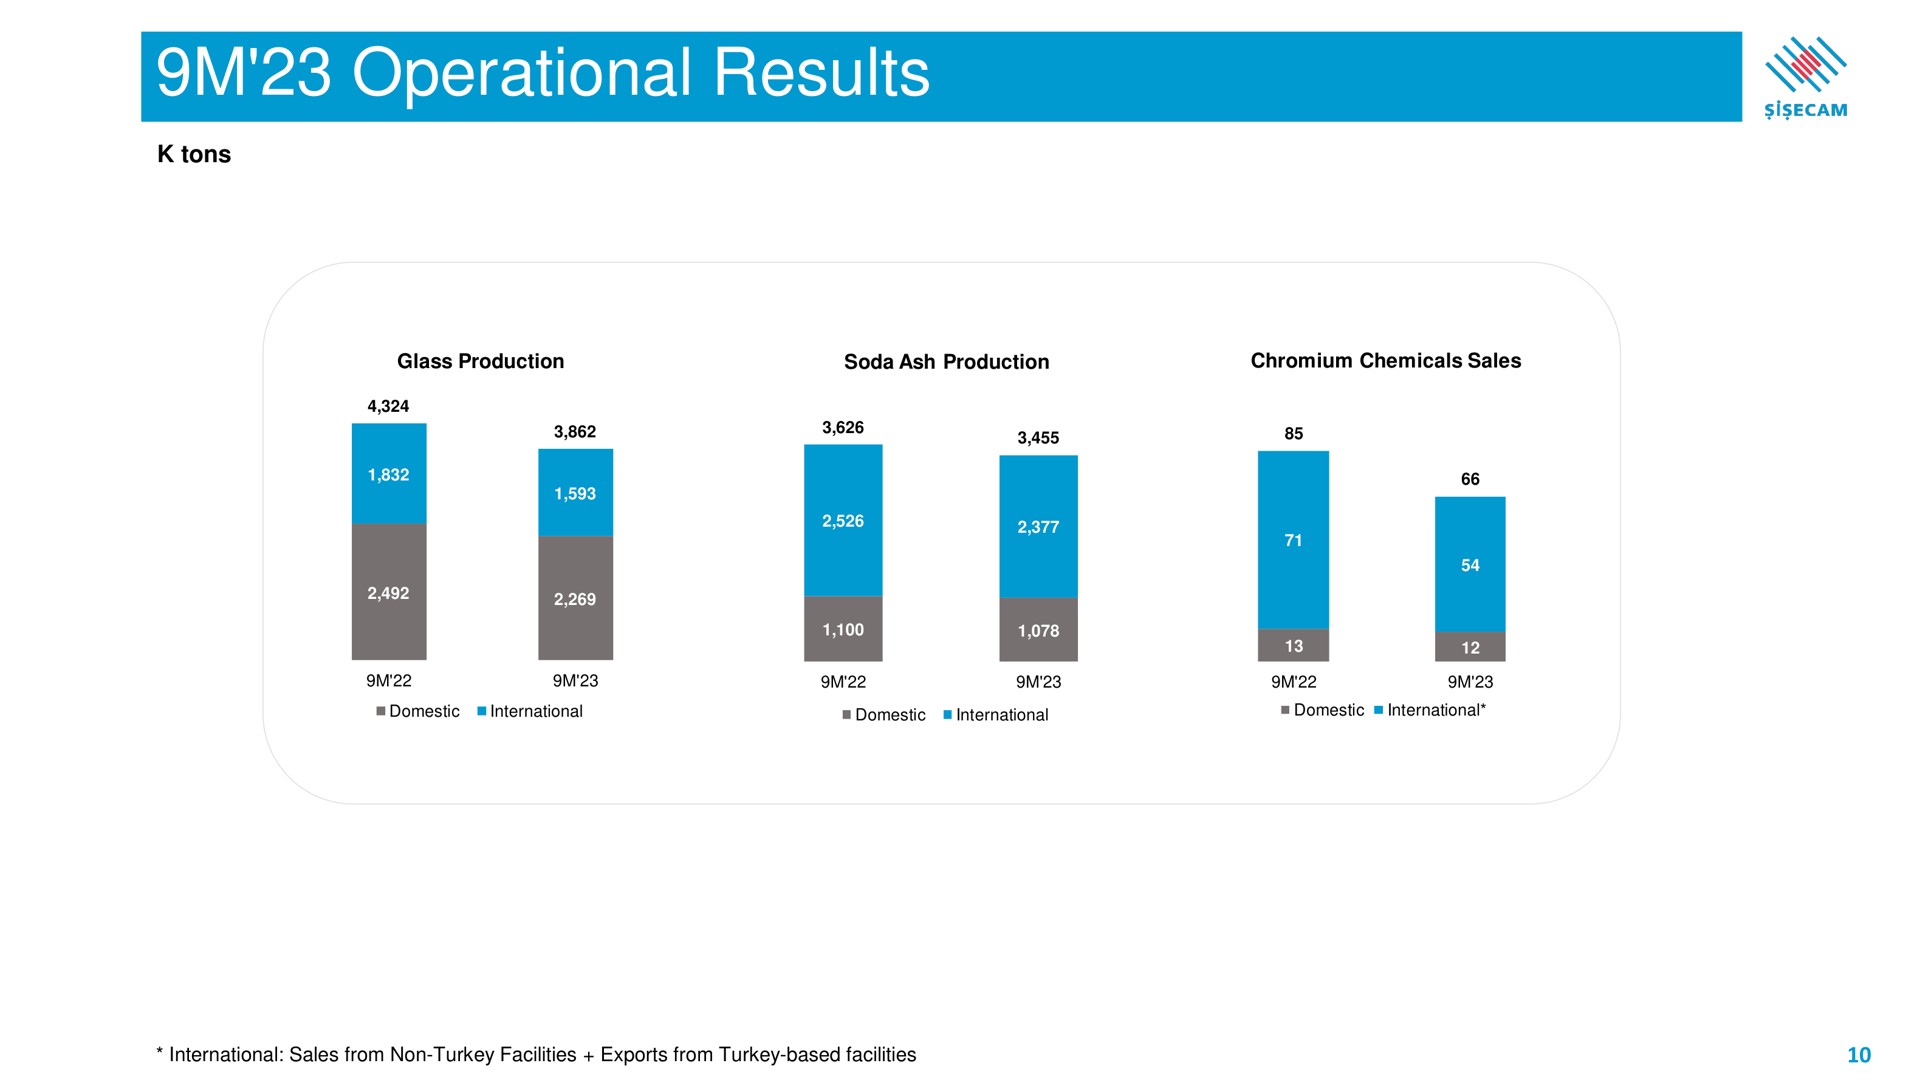 operational results | Sisecam Resources